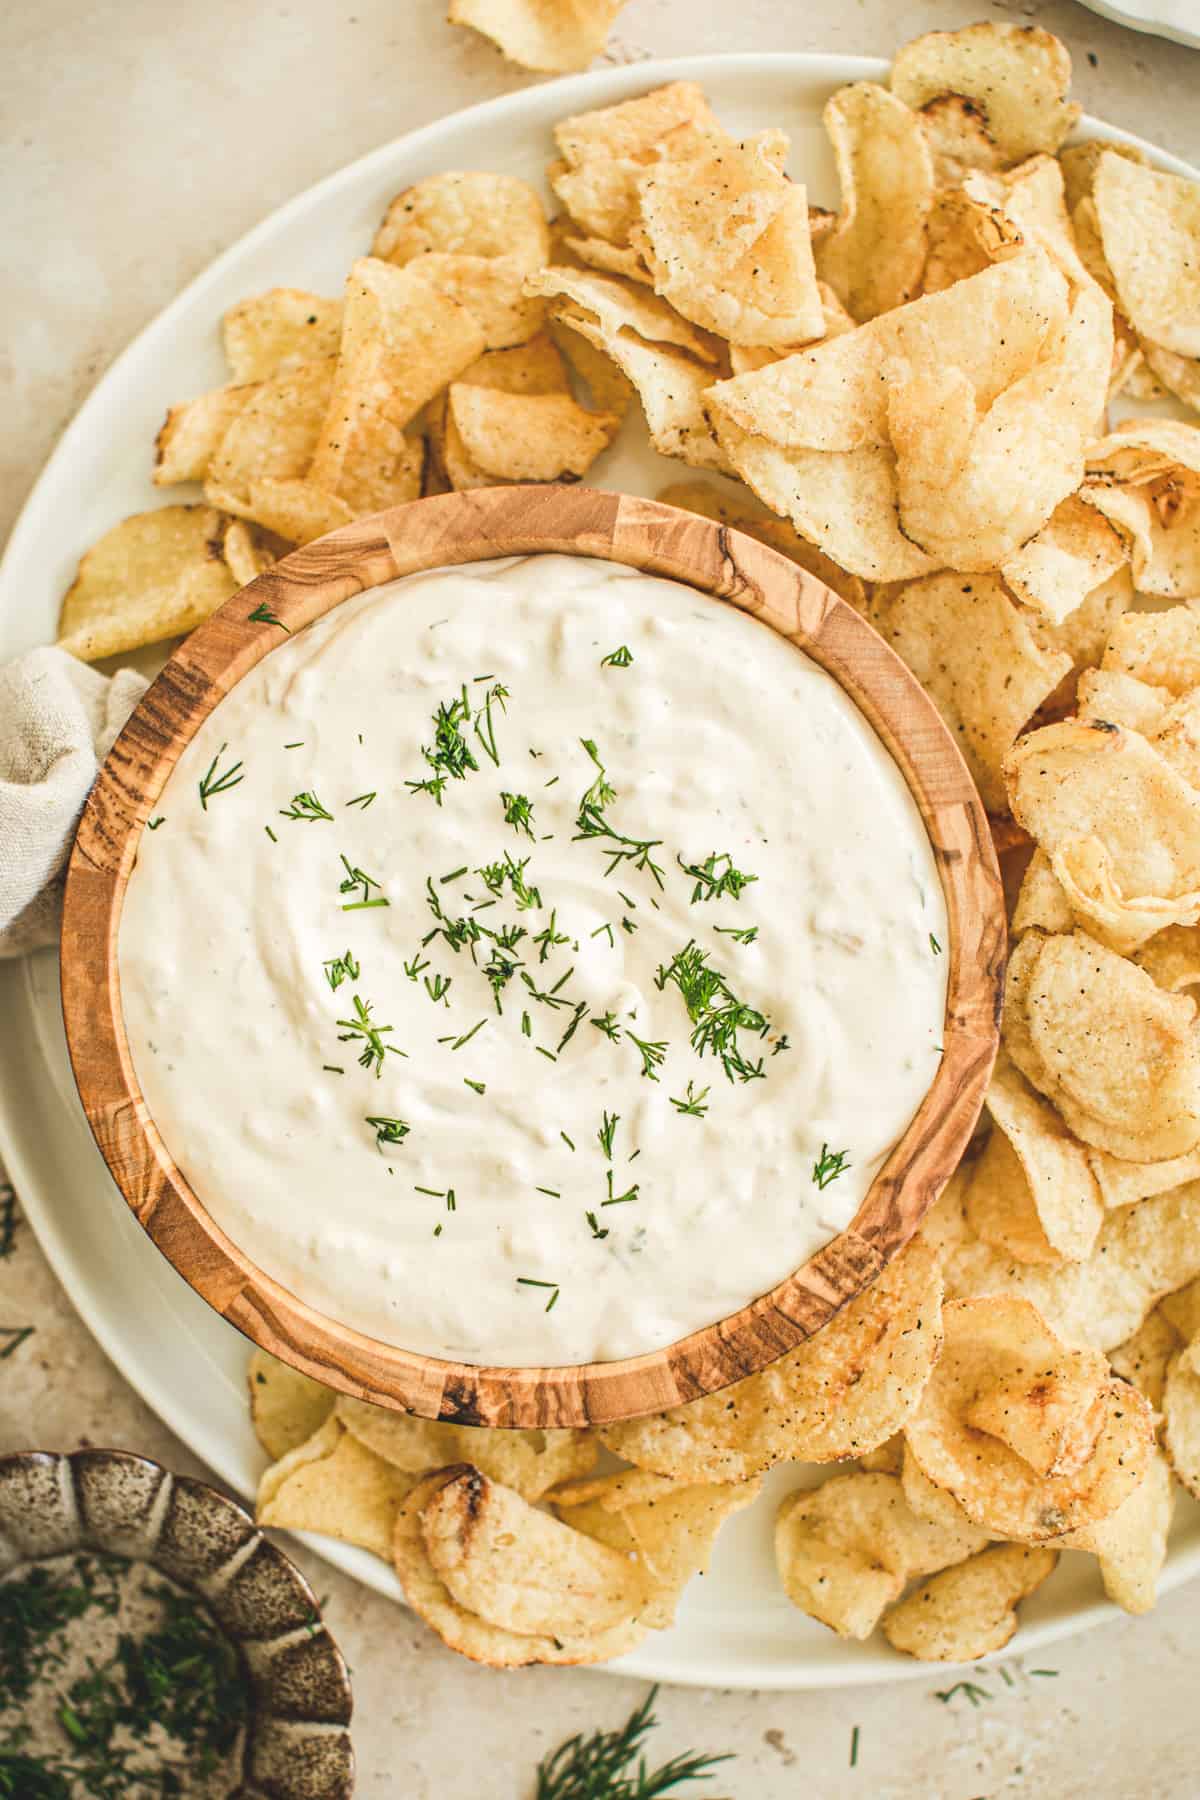 Clam dip topped with fresh dill in a wooden bowl with chips around it.